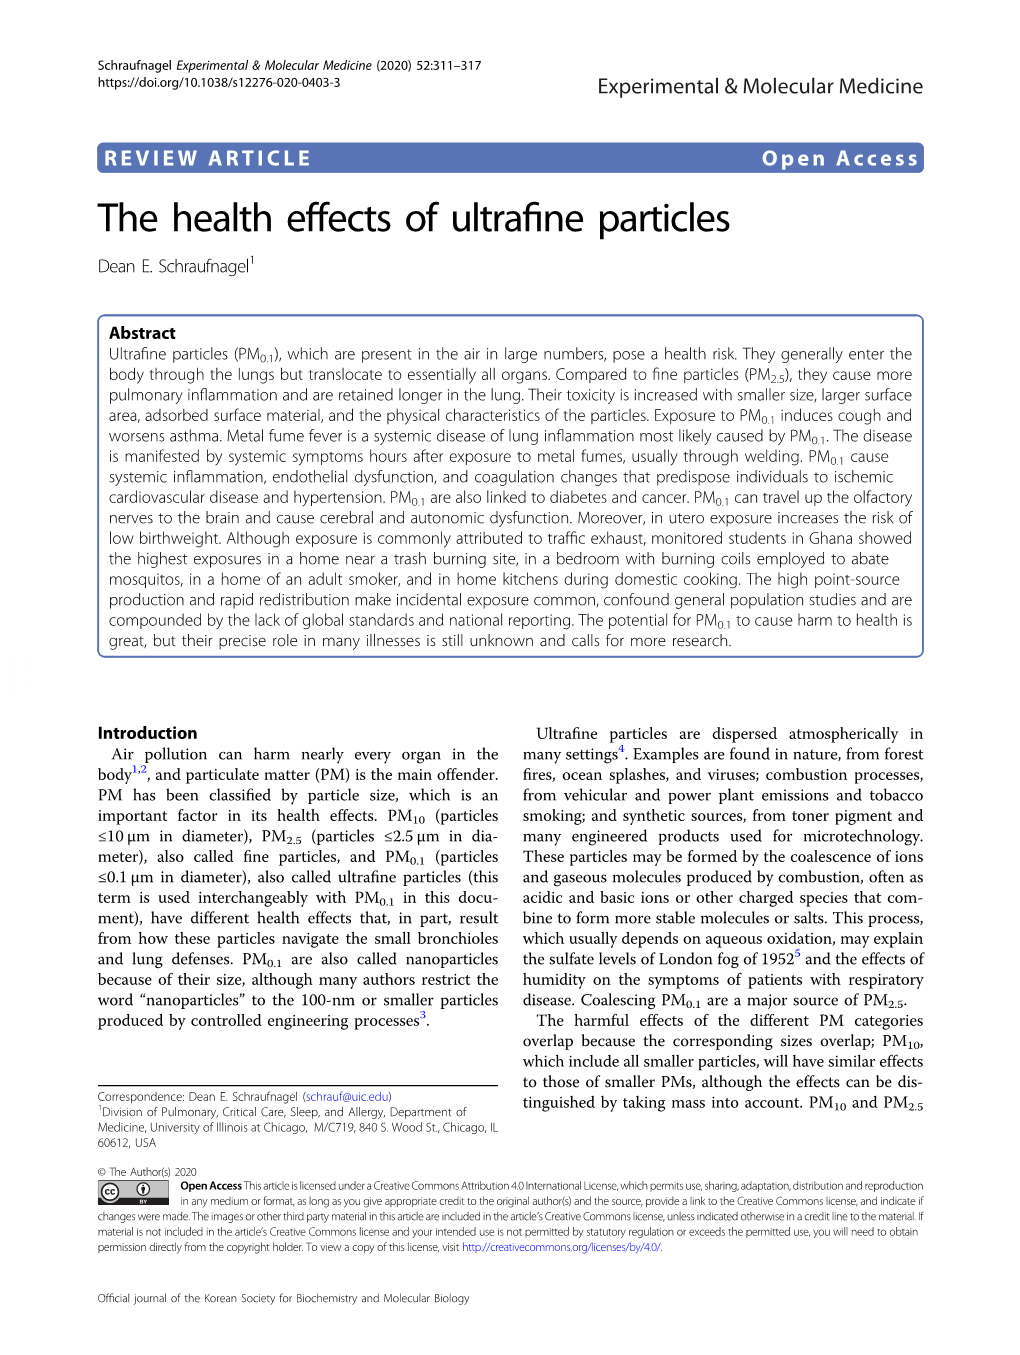 The Health Effects of Ultrafine Particles